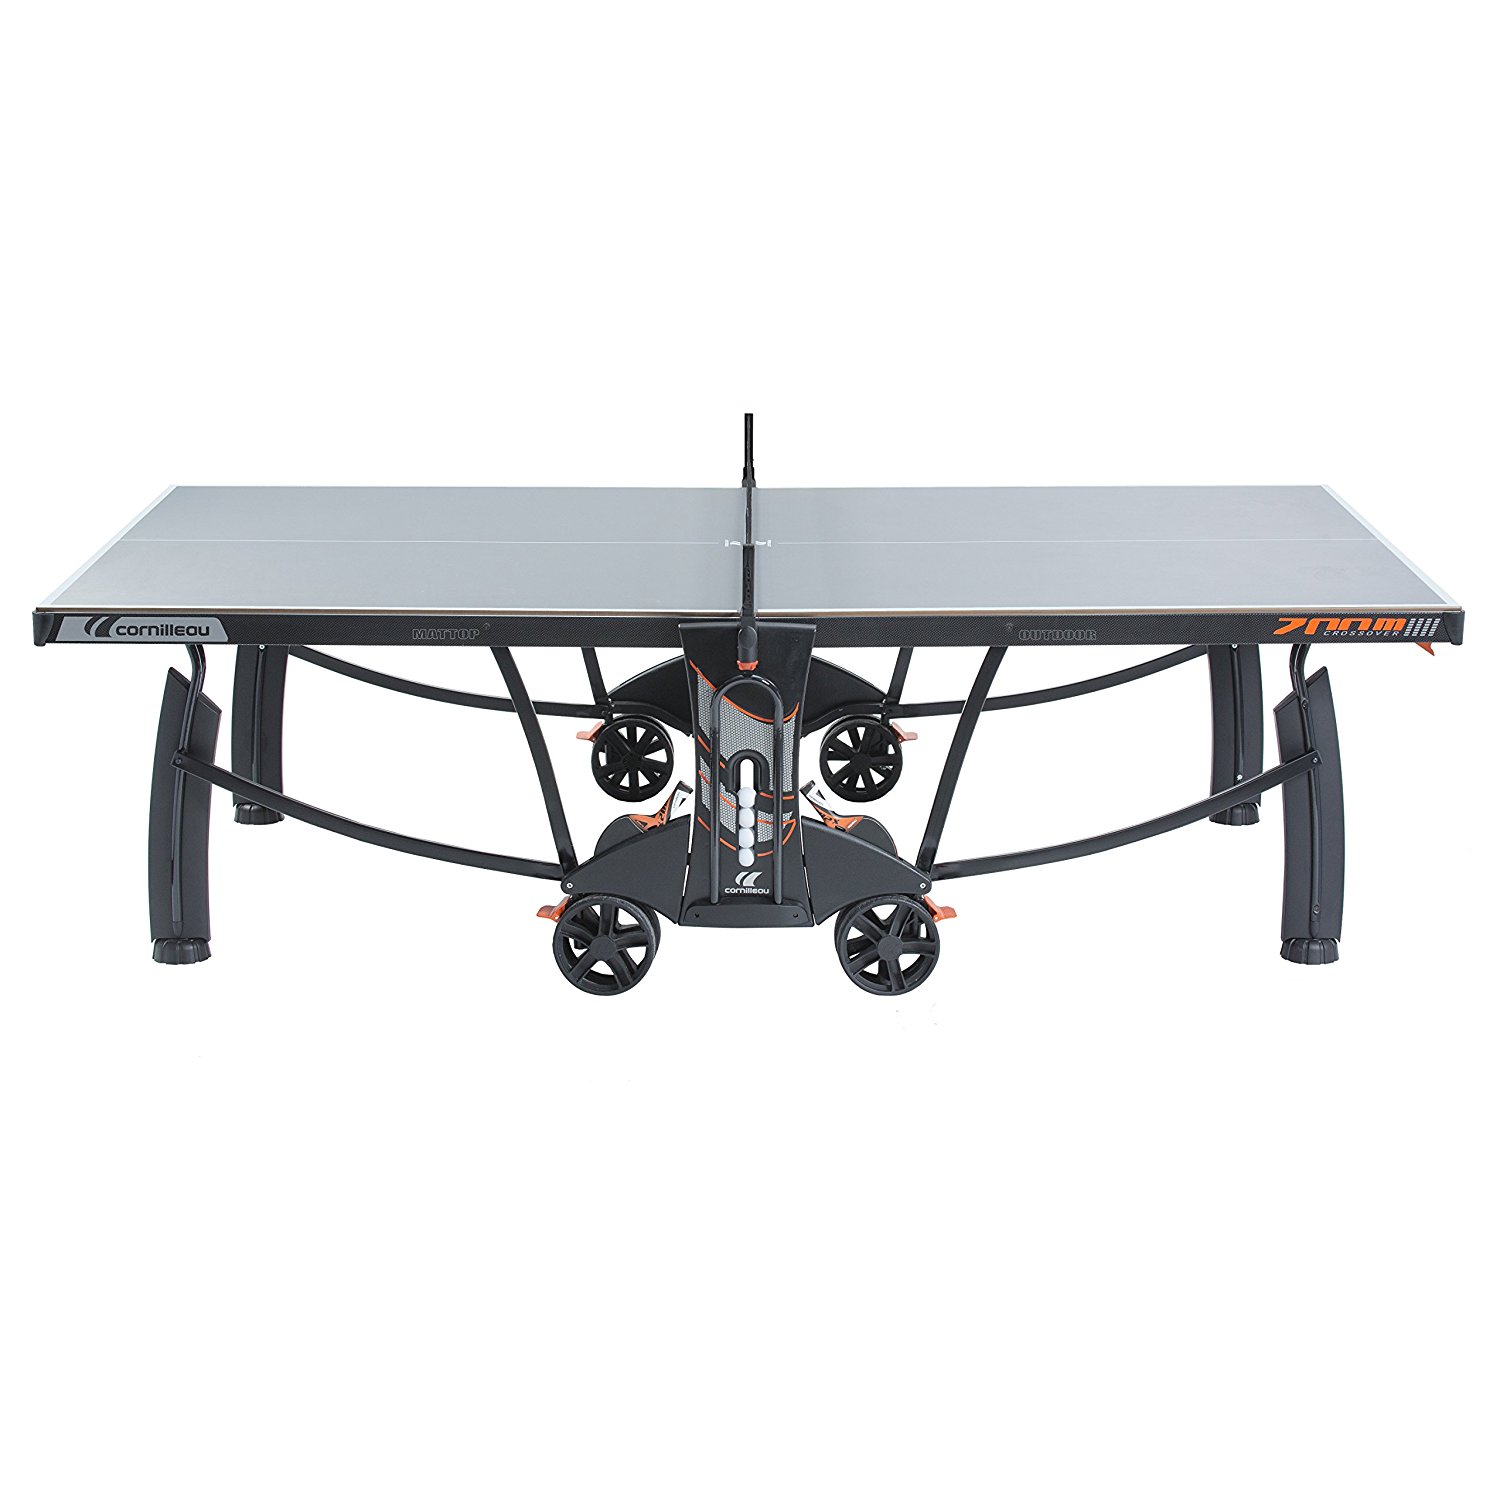 Pro 540 Crossover Outdoor - Cornilleau Table Tennis Table